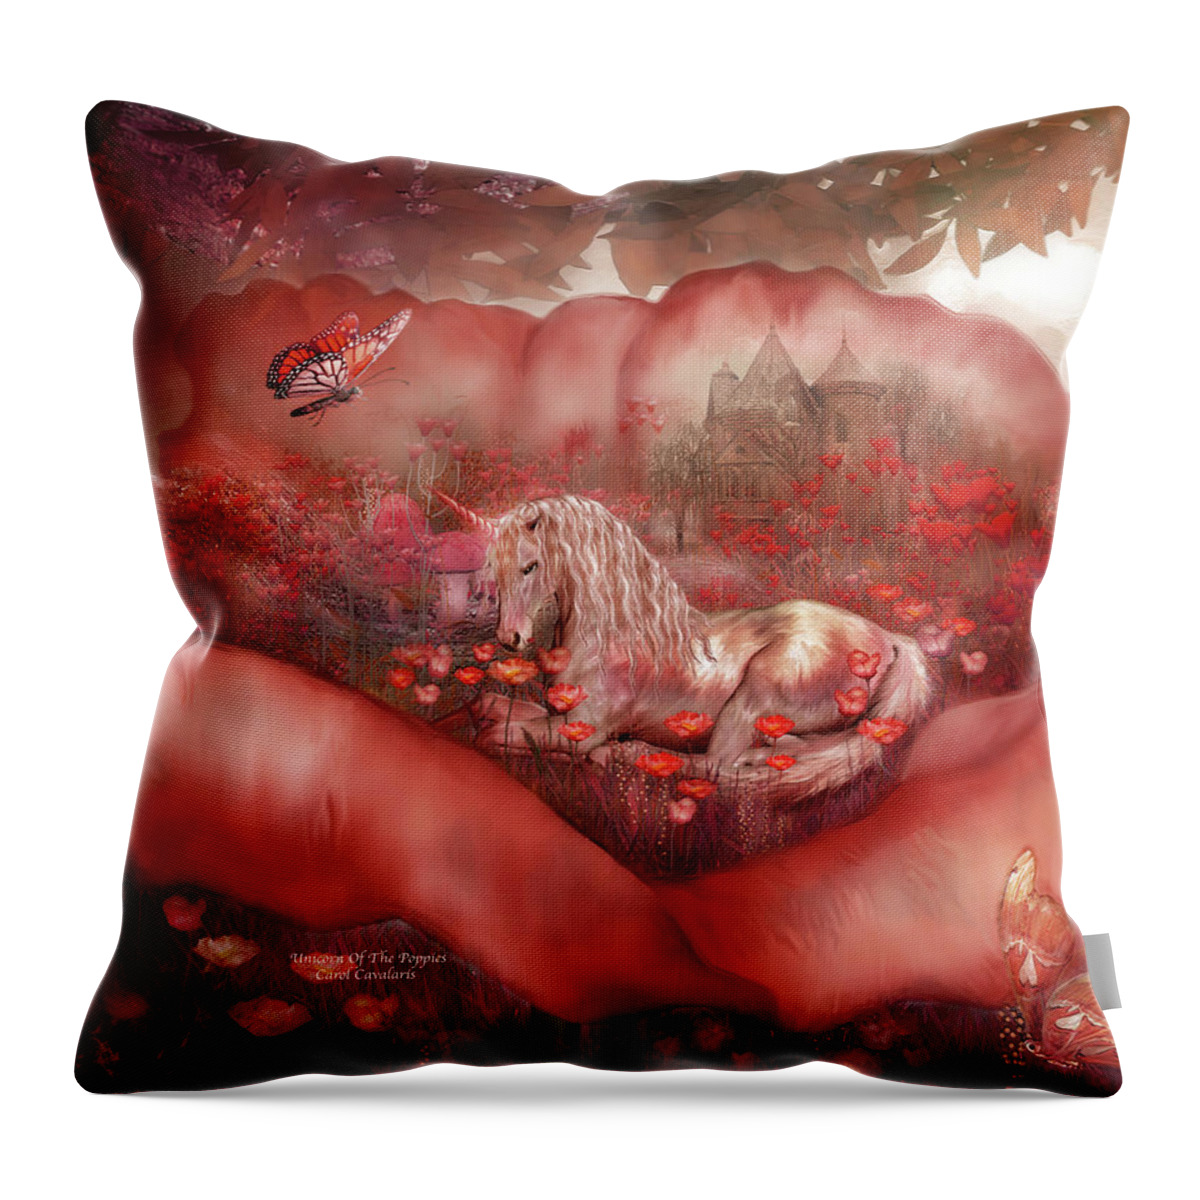 Unicorn Throw Pillow featuring the mixed media Unicorn Of The Poppies by Carol Cavalaris